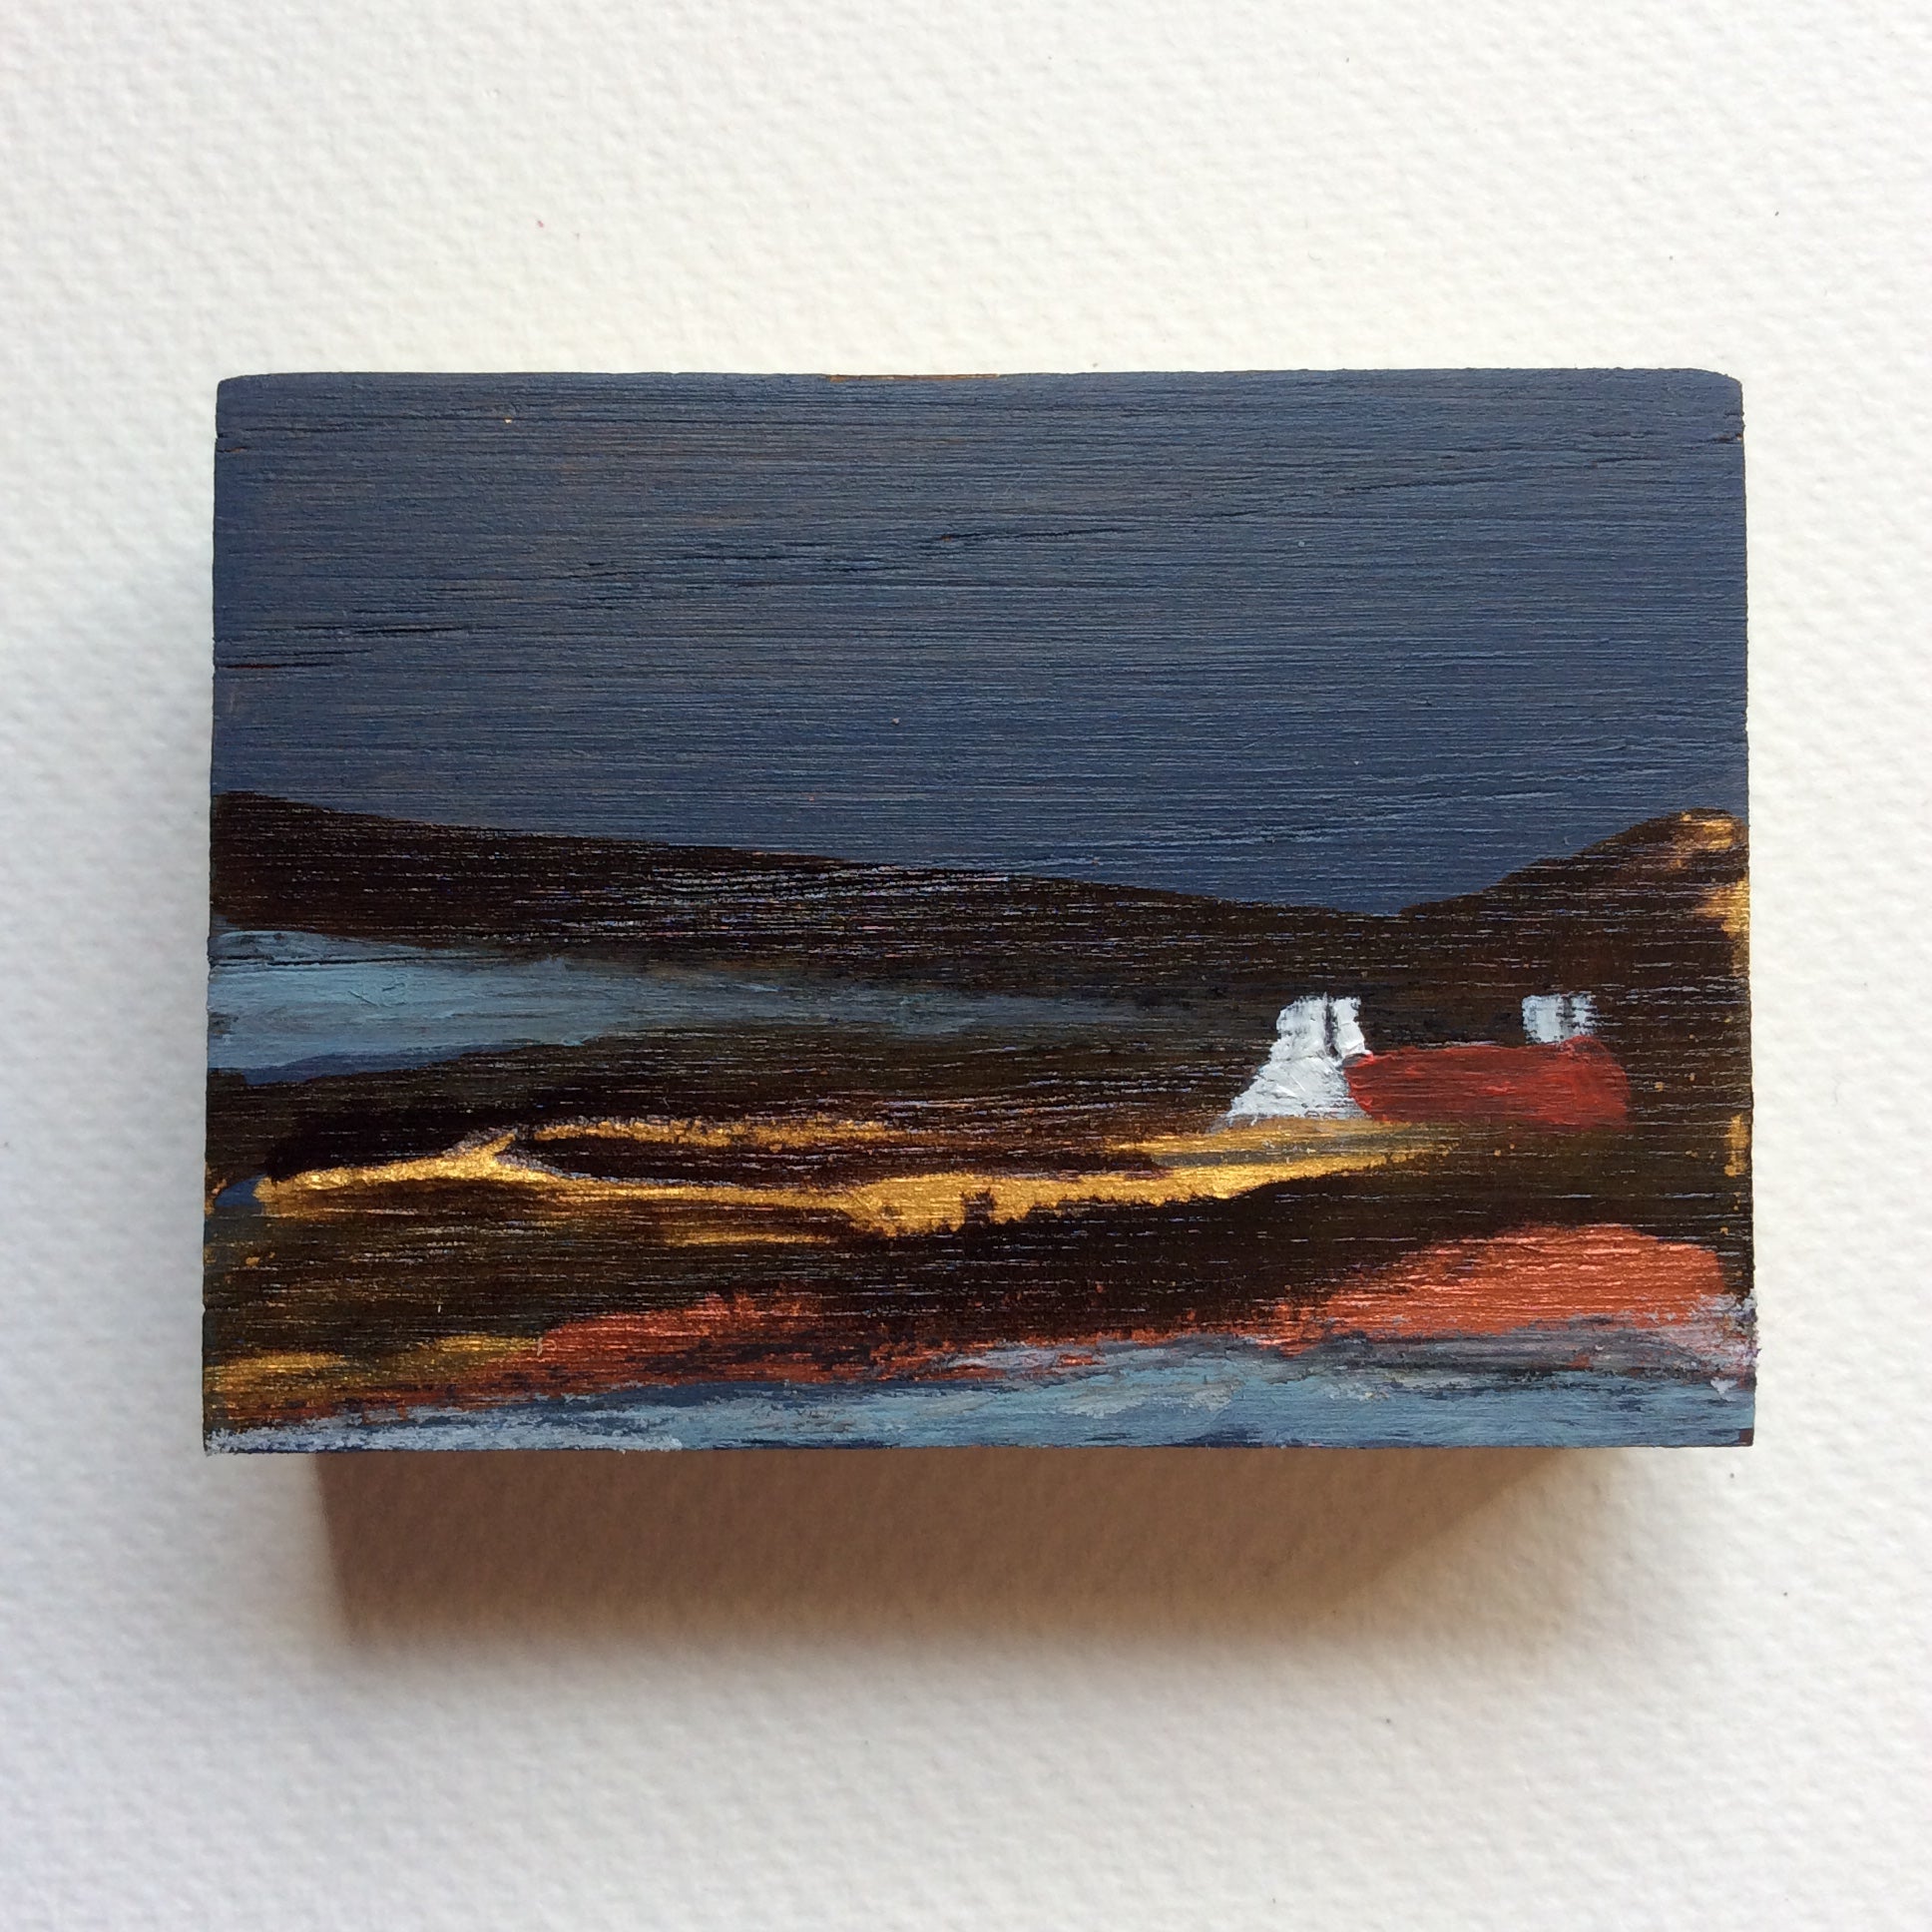 Miniature Mixed Media Art on wood By Louise O'Hara - "One Autumn evening”